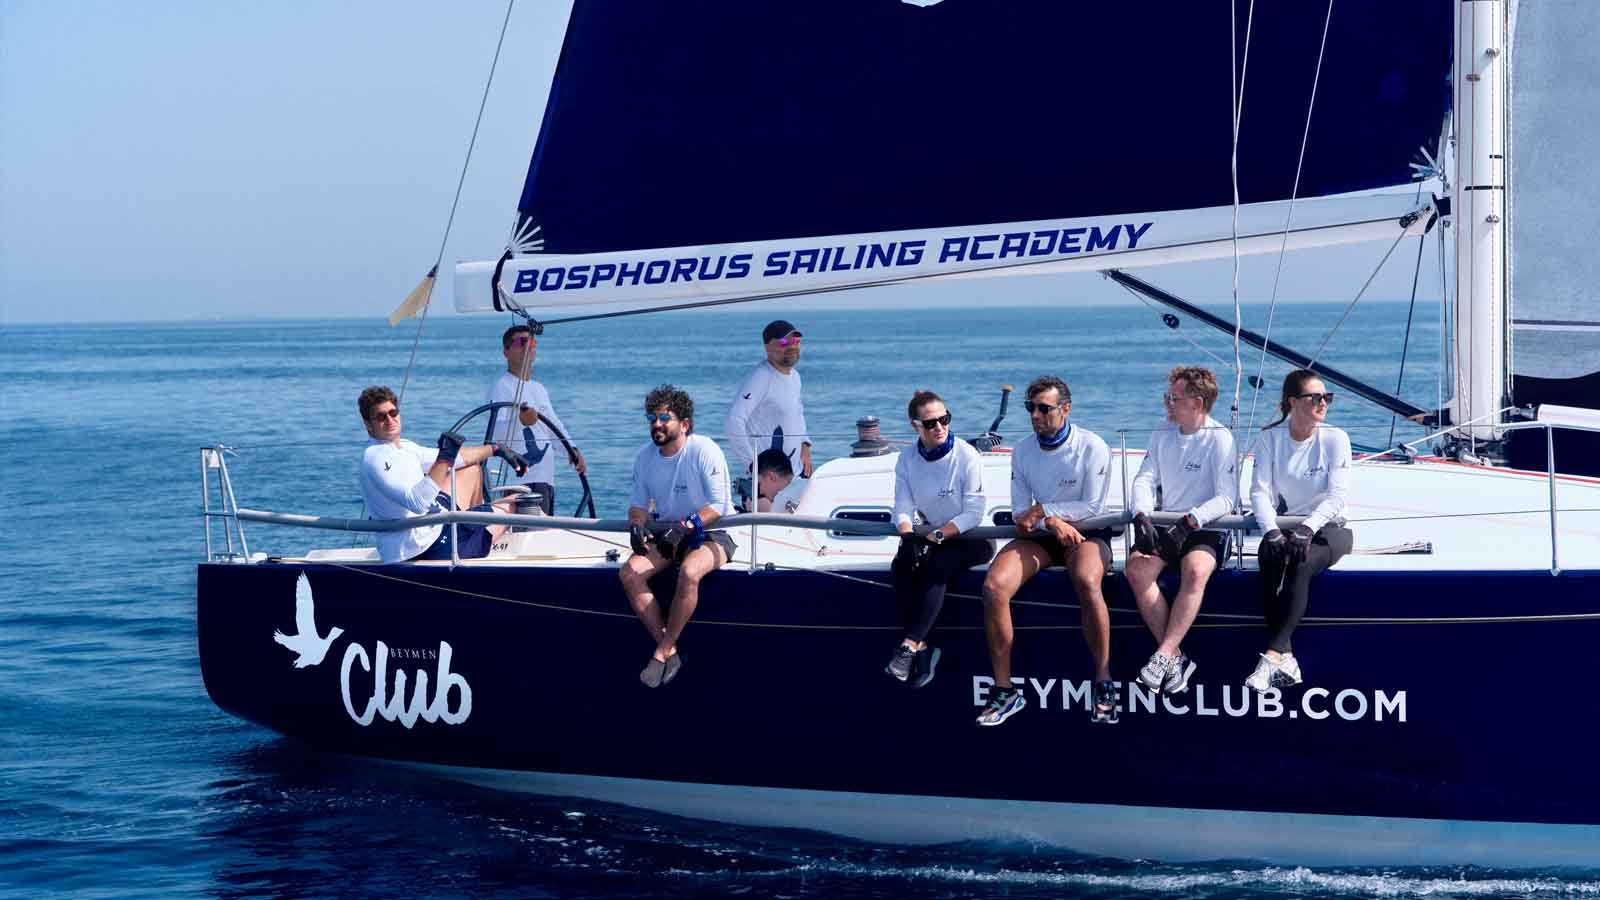 Beymen Club Will Play An Active Role In Sailing Races Throughout The Year